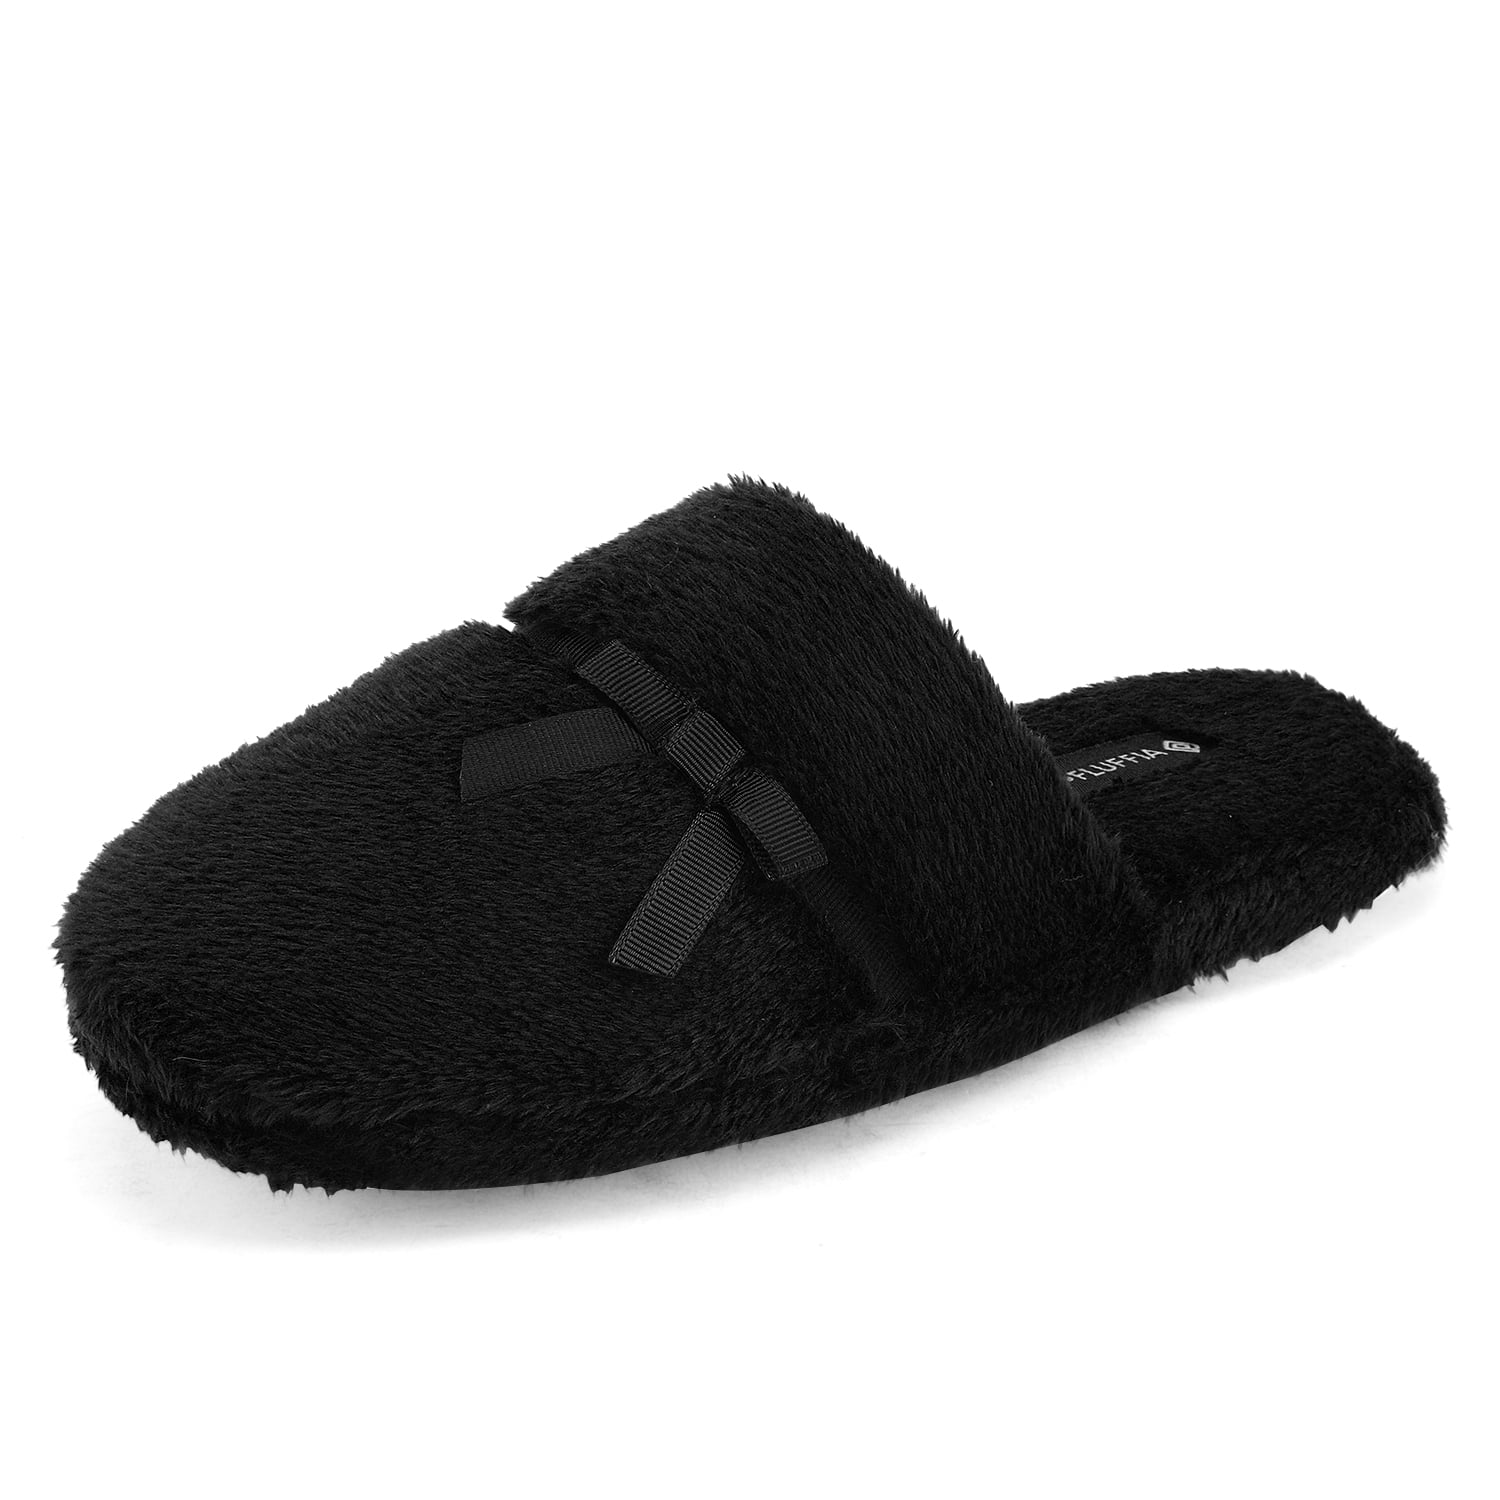 Dream Pairs - DREAM PAIRS Faux Fur Soft Slippers For Women Slip on ...